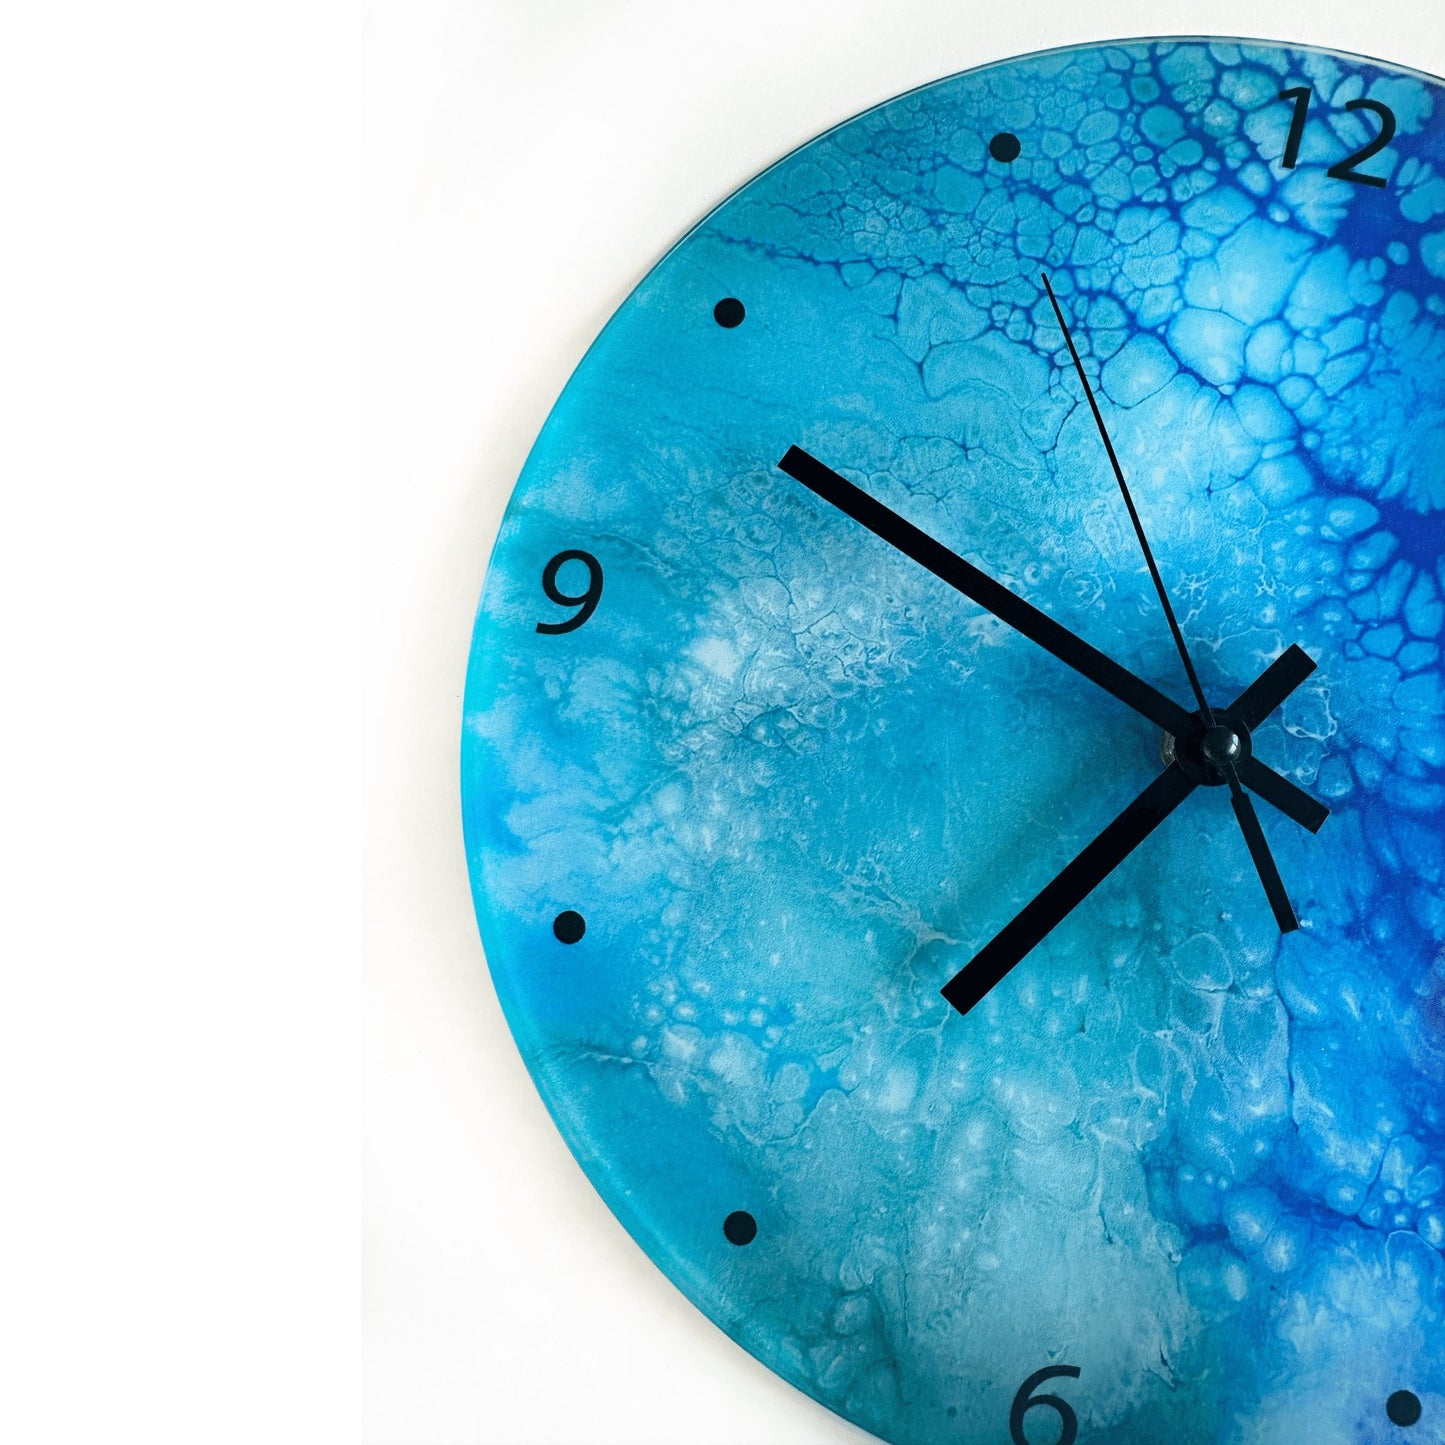 Seabed Serendipity Wall Clock